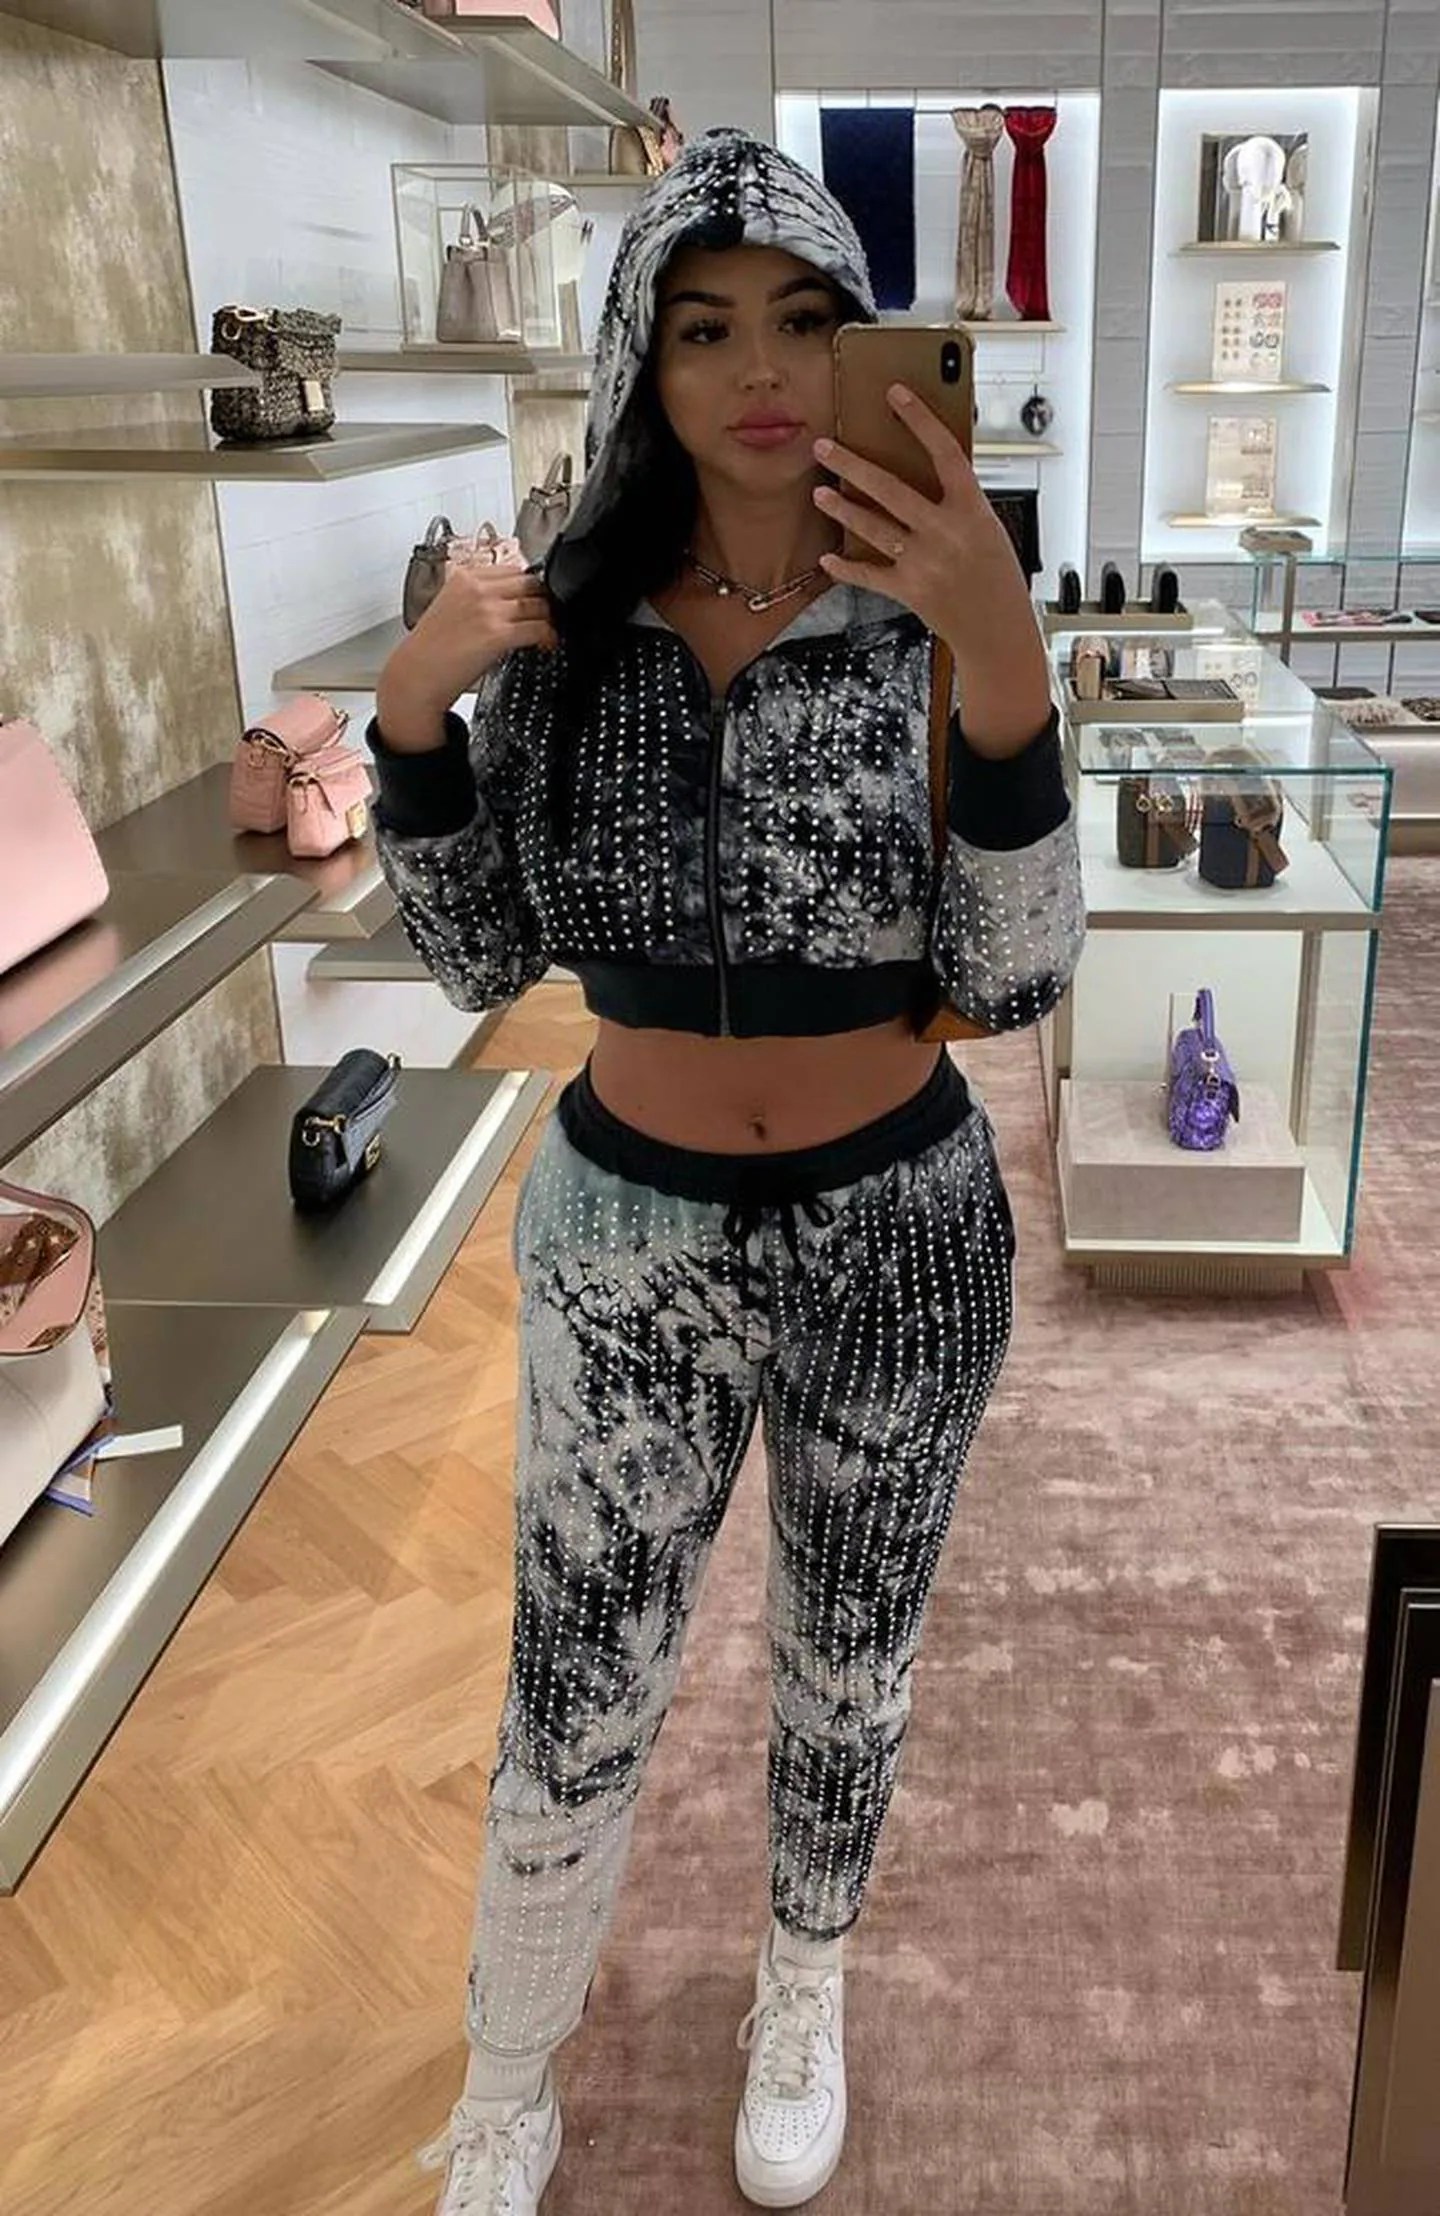 OnlyFans star Anna Paul reveals 'truth' behind 'lavish' lifestyle in